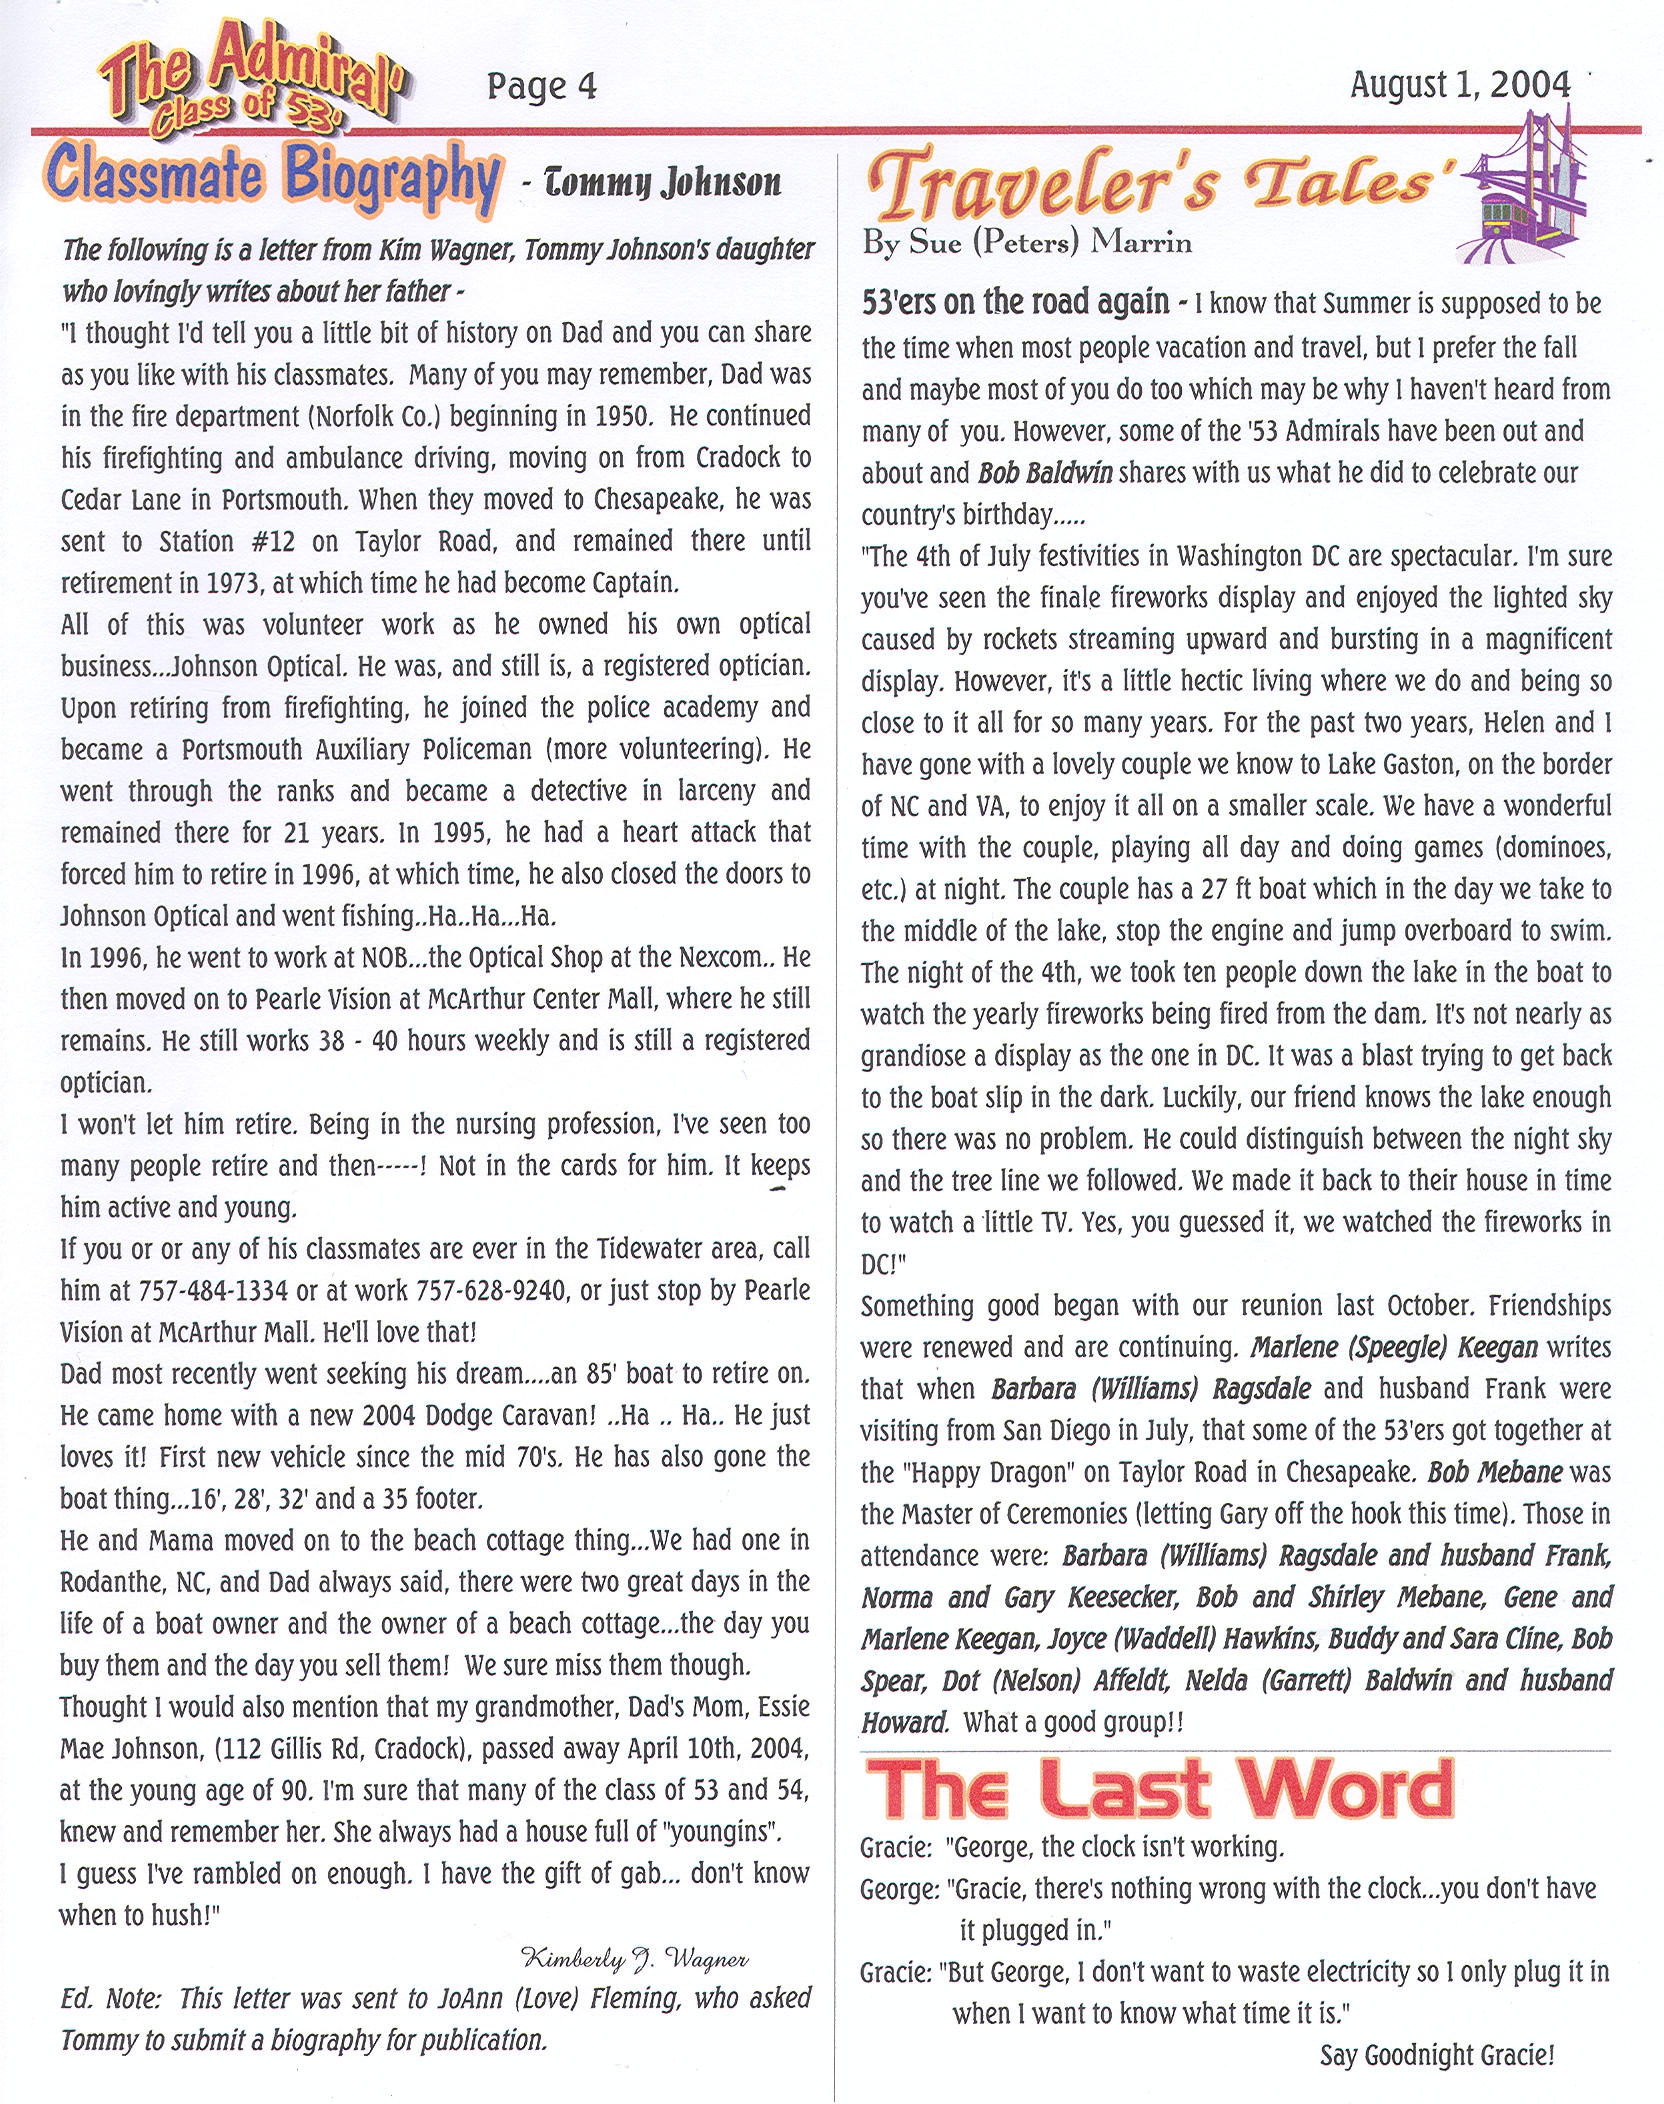 The Admiral - August 2004 - pg. 4